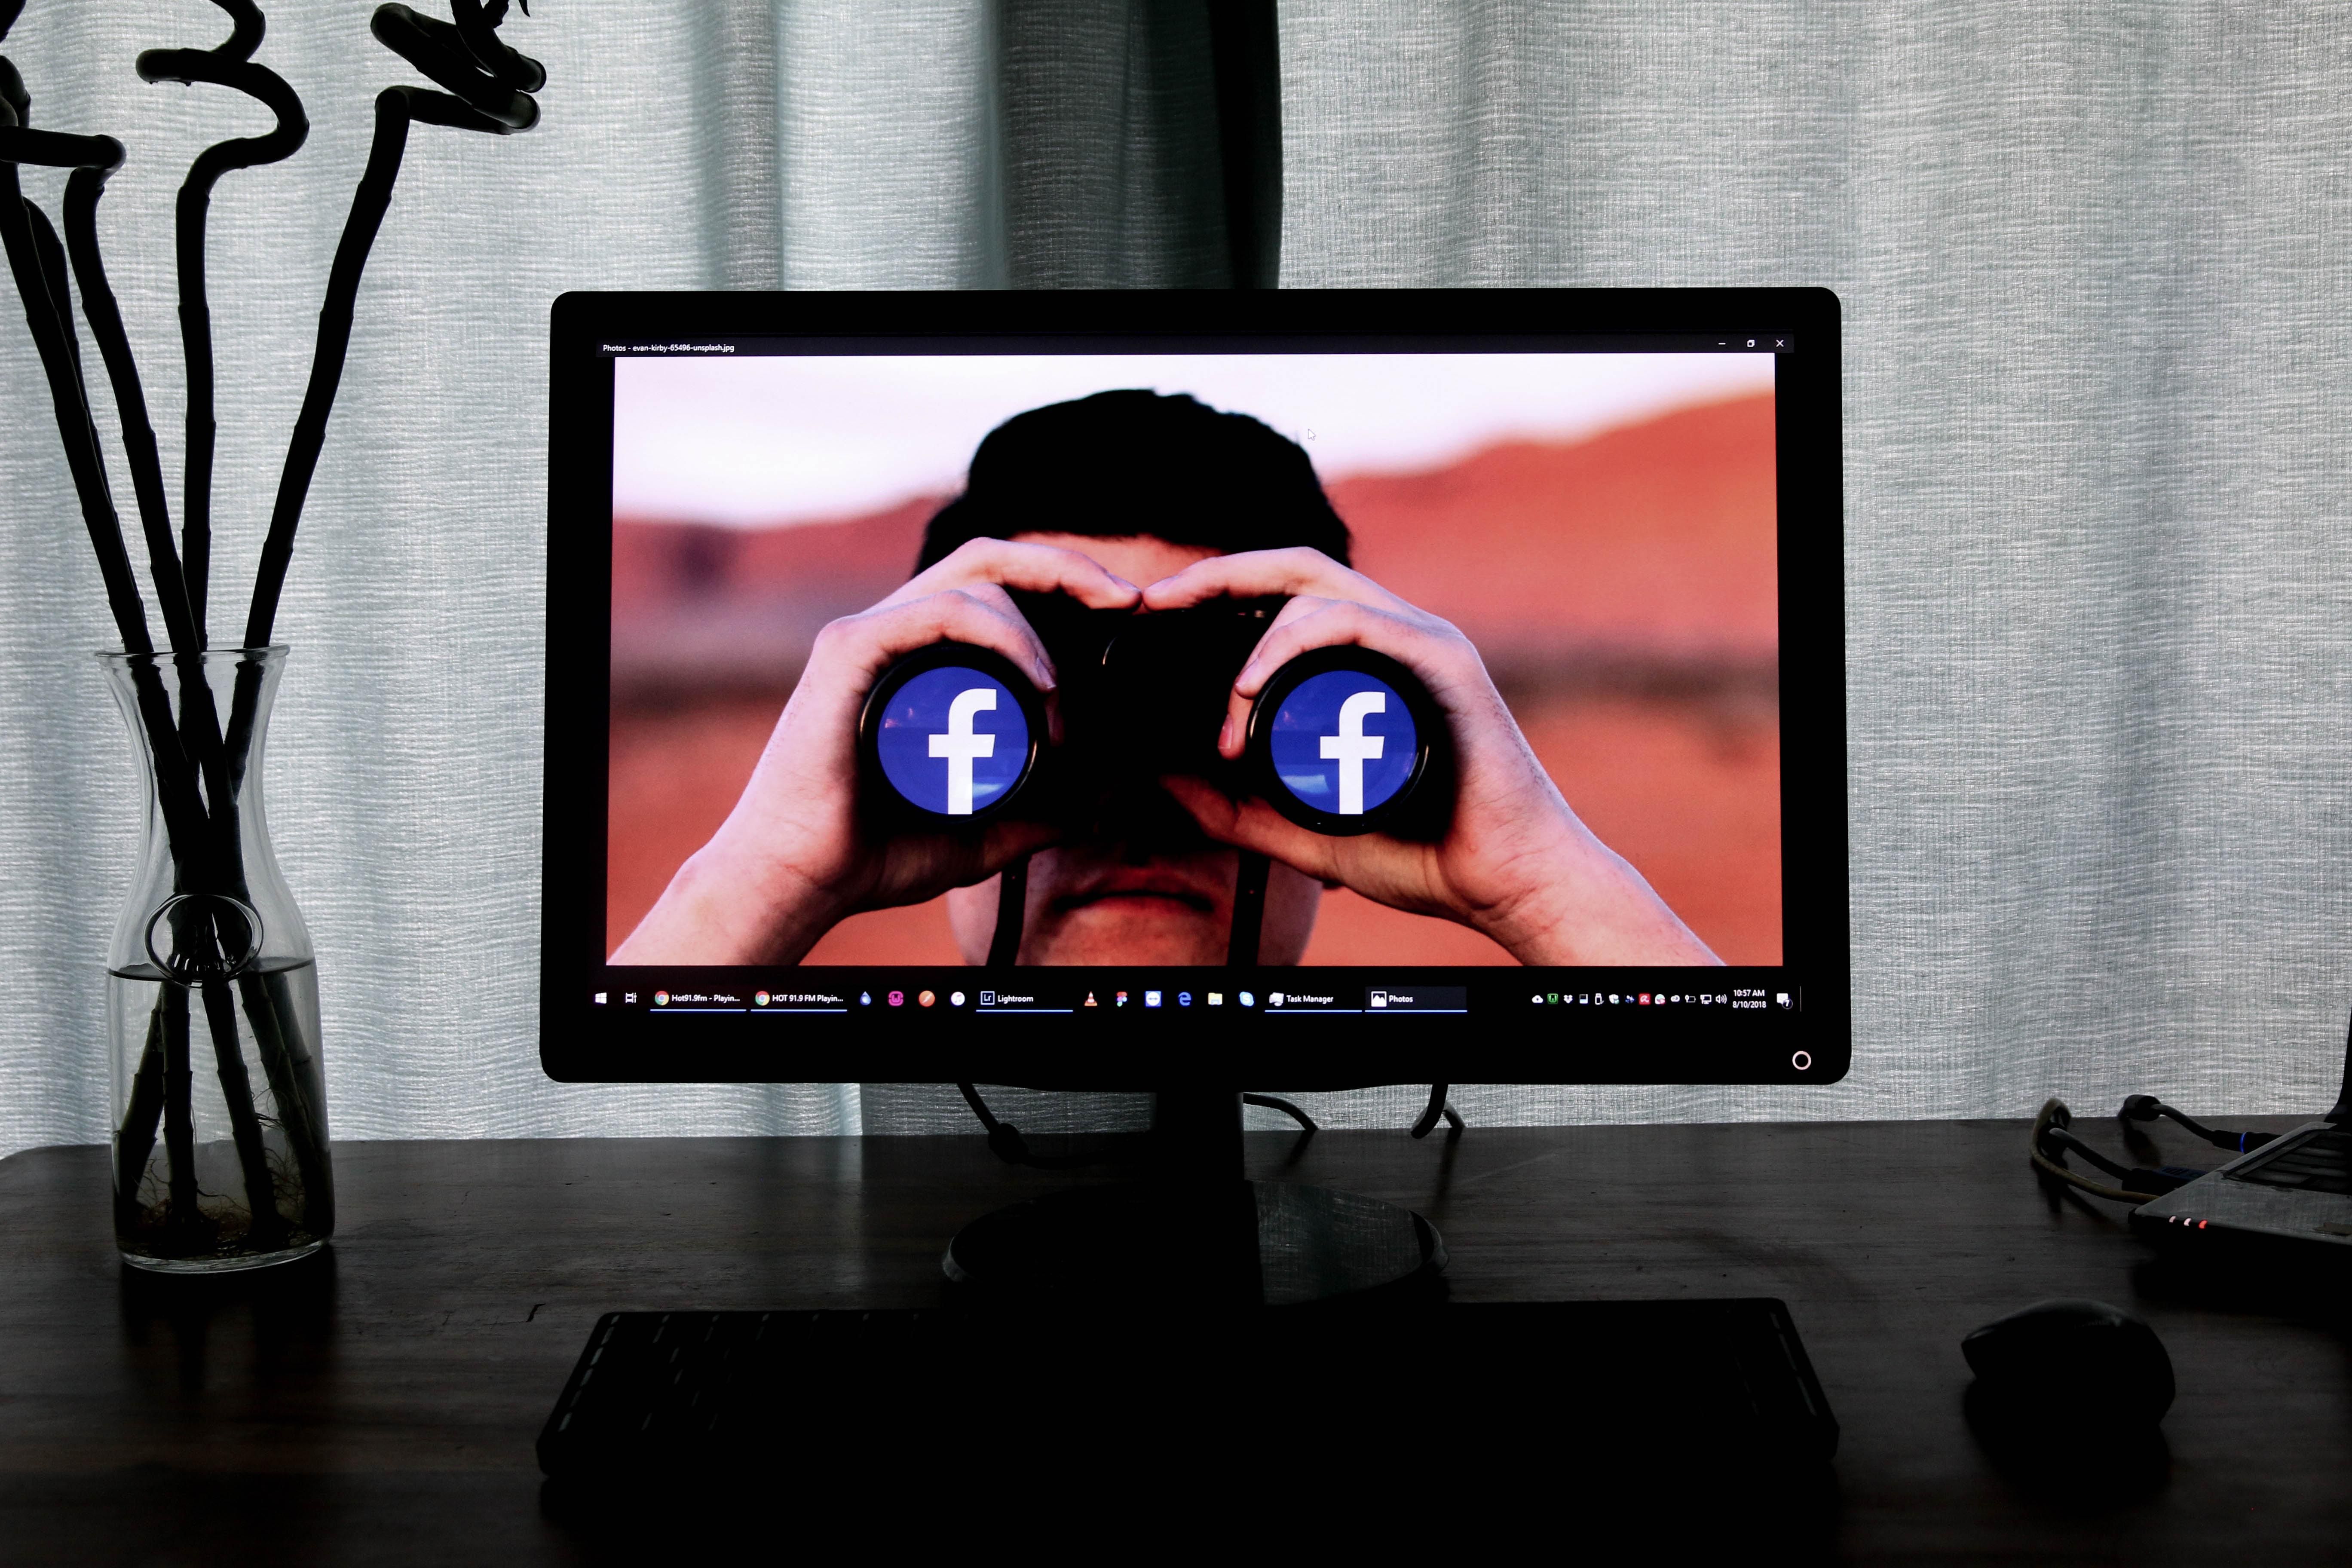 HOW TO OPTIMIZE YOUR FACEBOOK PROFILE